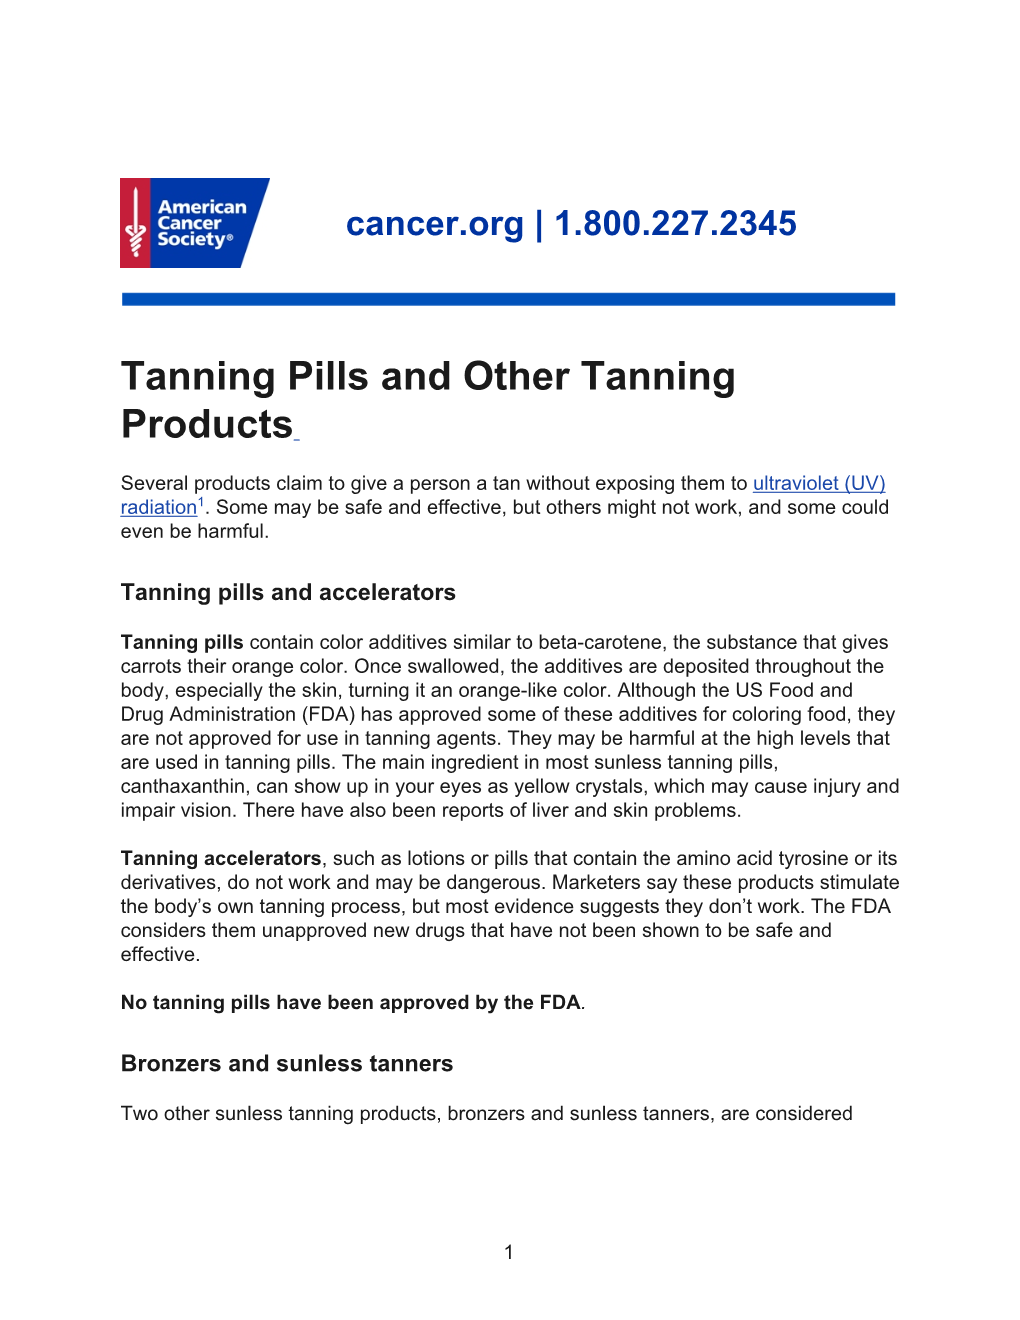 Tanning Pills and Other Tanning Products